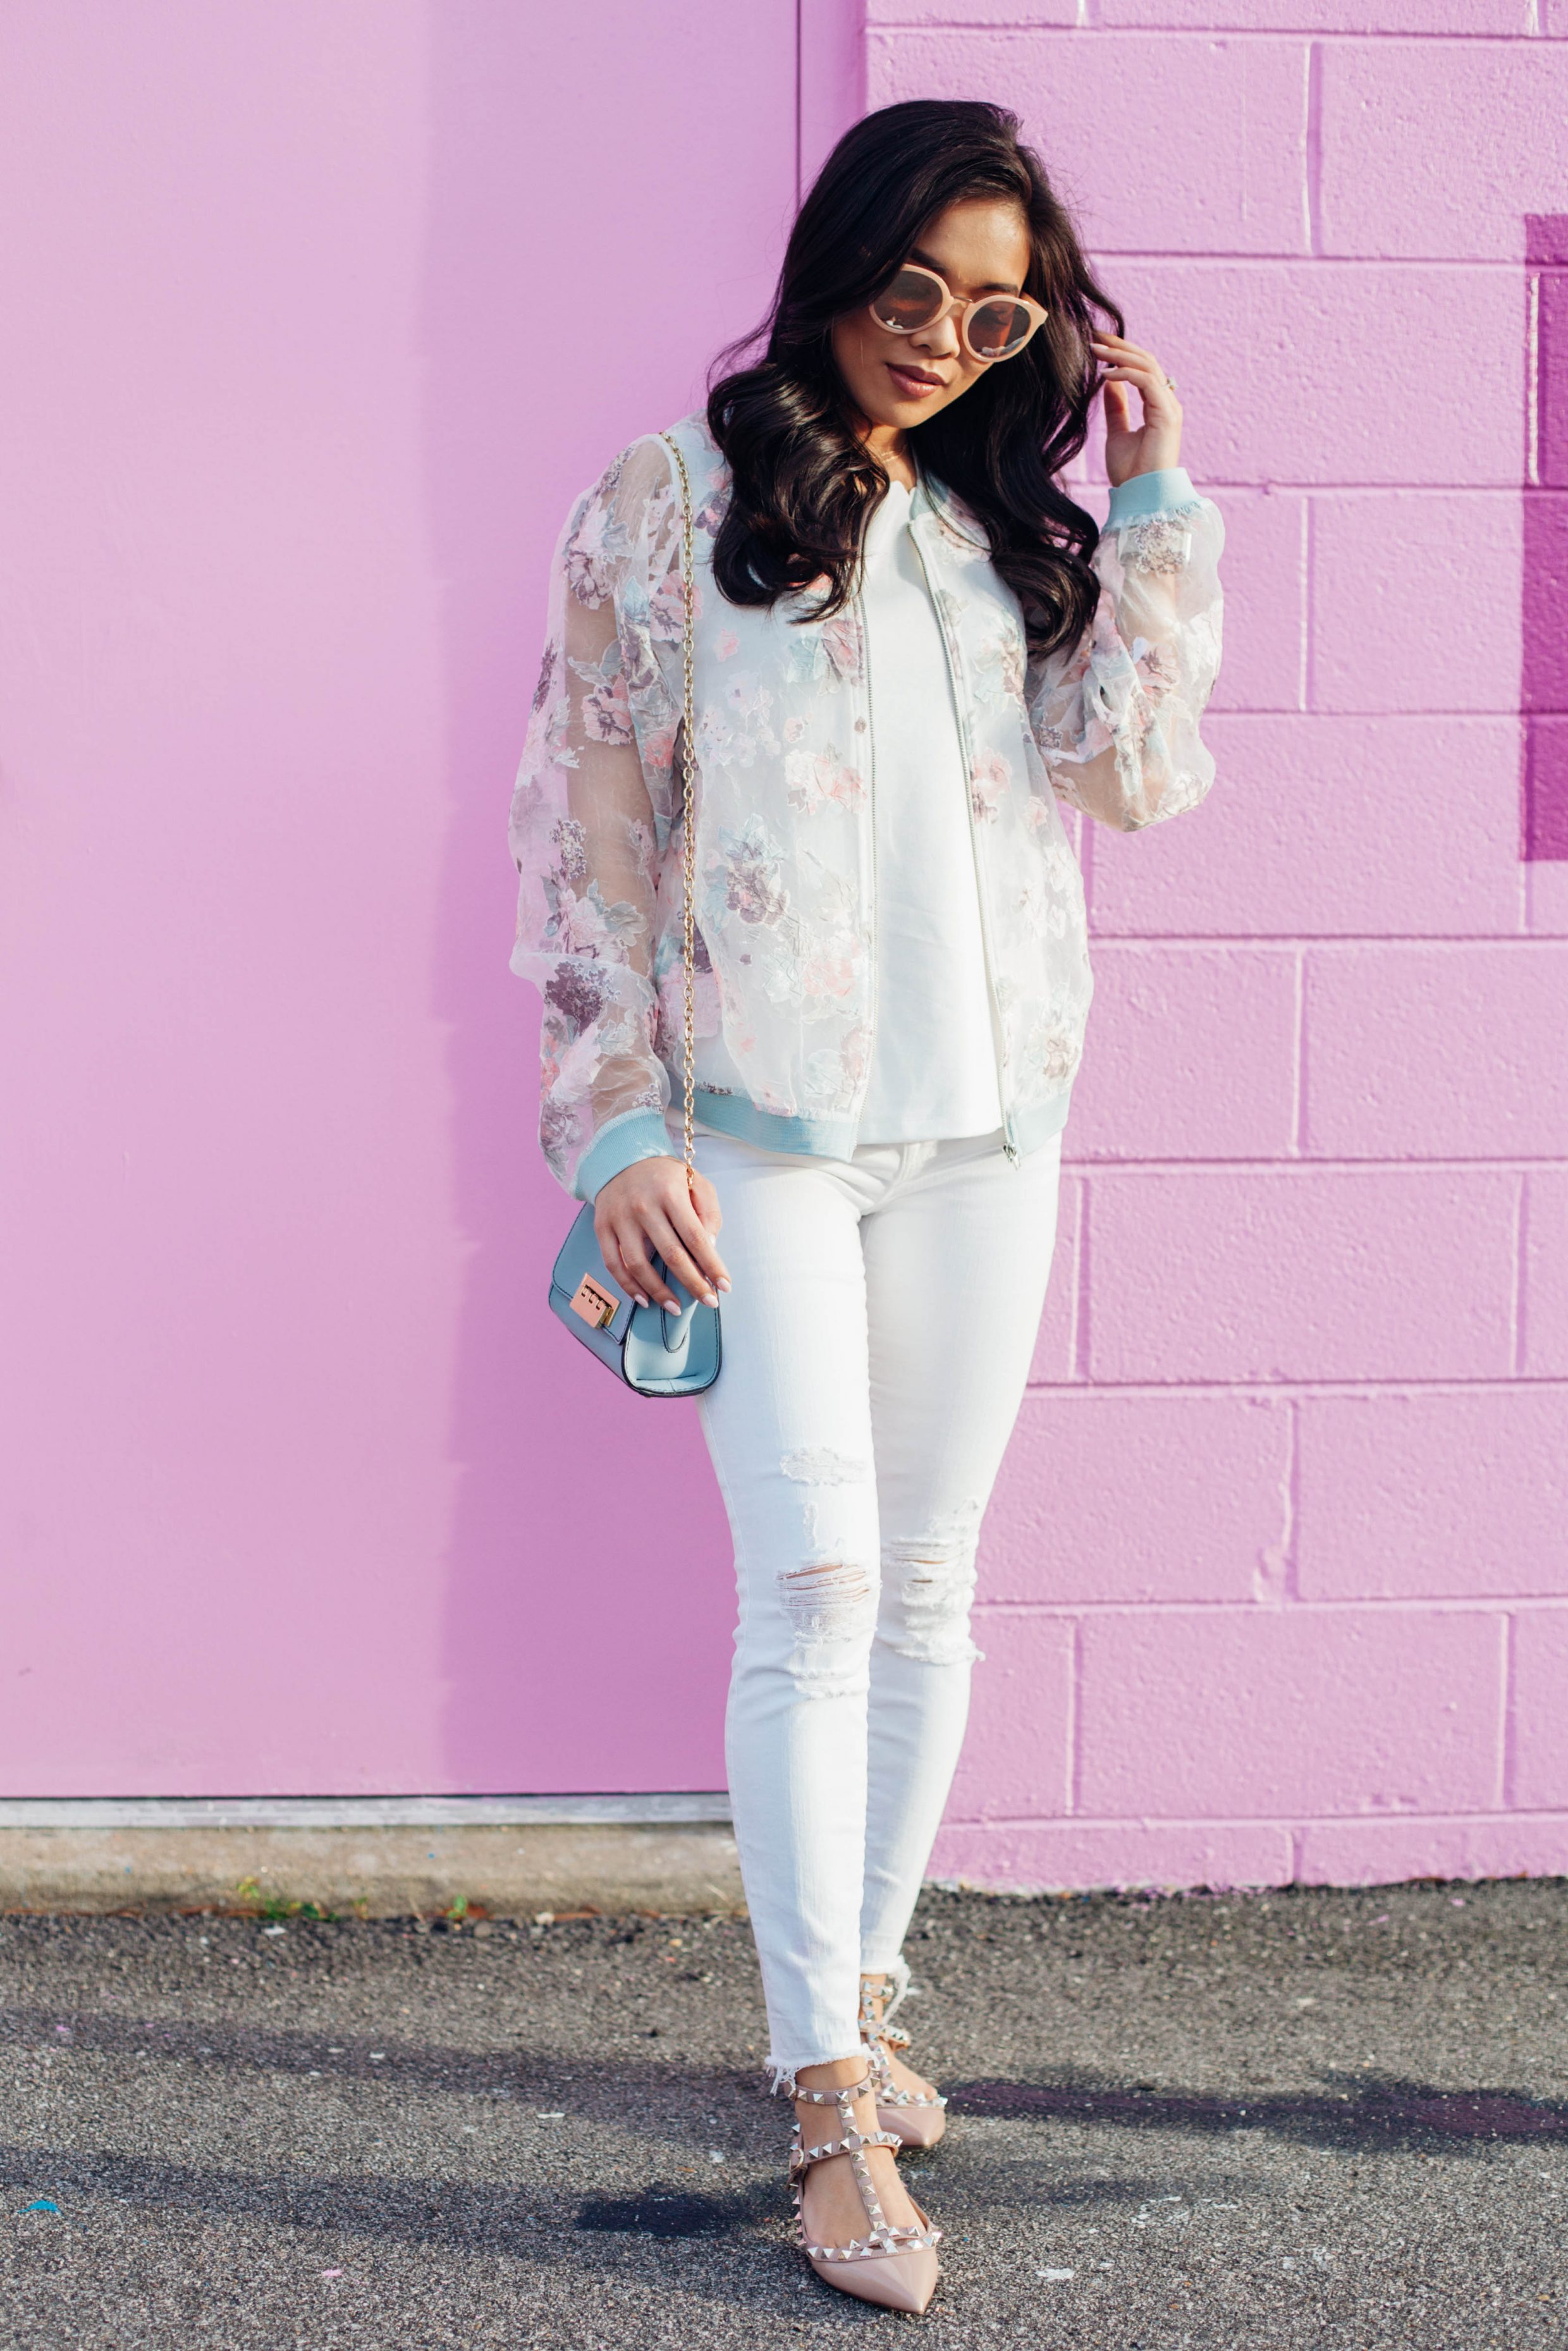 COLOR & CHIC | Floral bomber jacket over an all white look